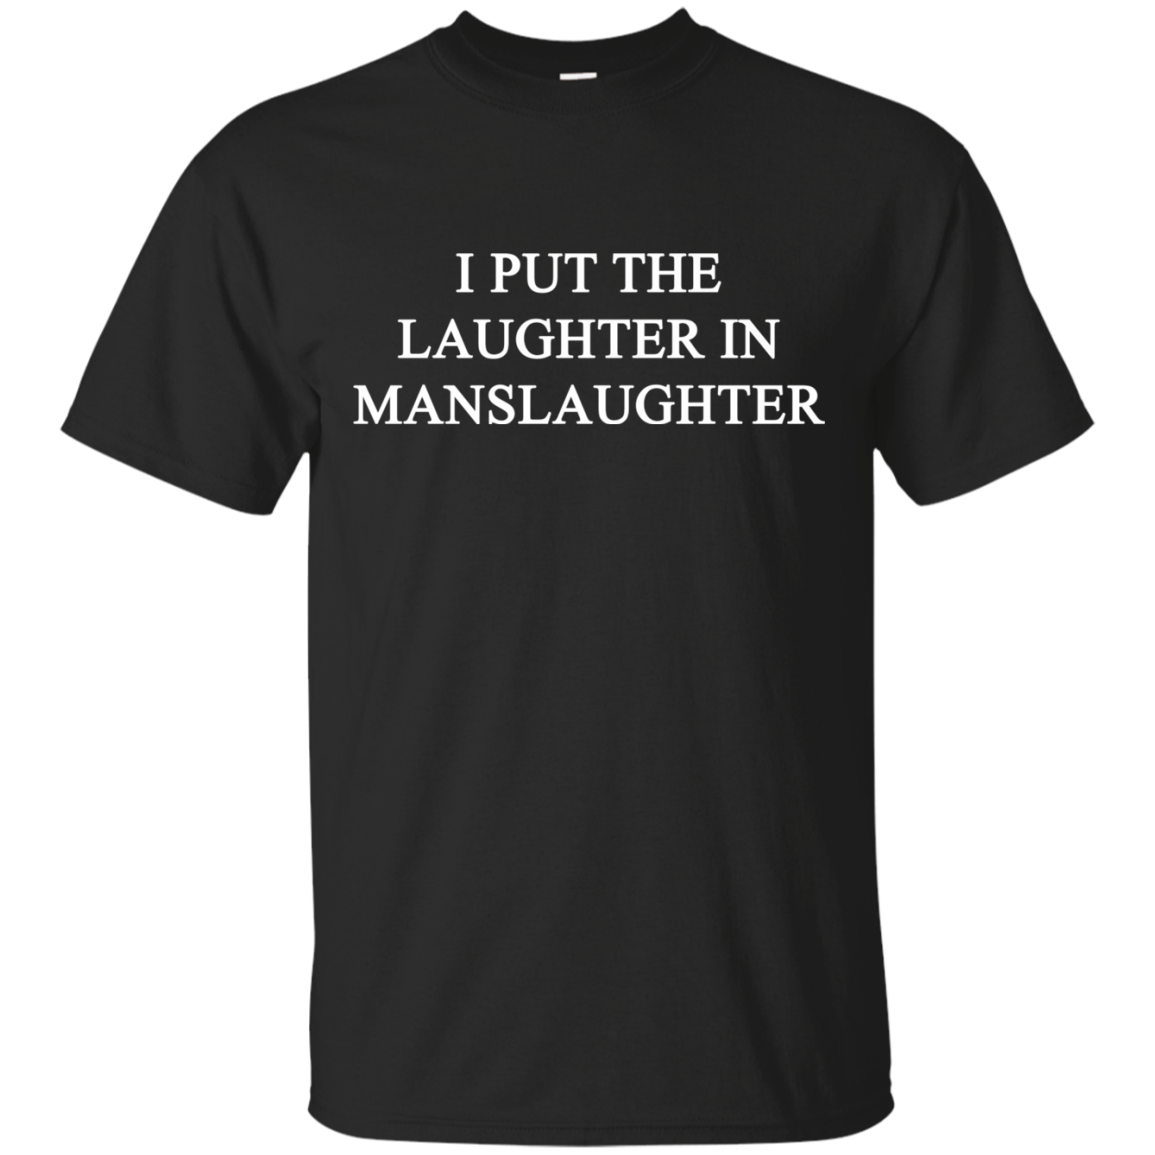 I Put The Laughter In Manslaughter Shirt - Amyna